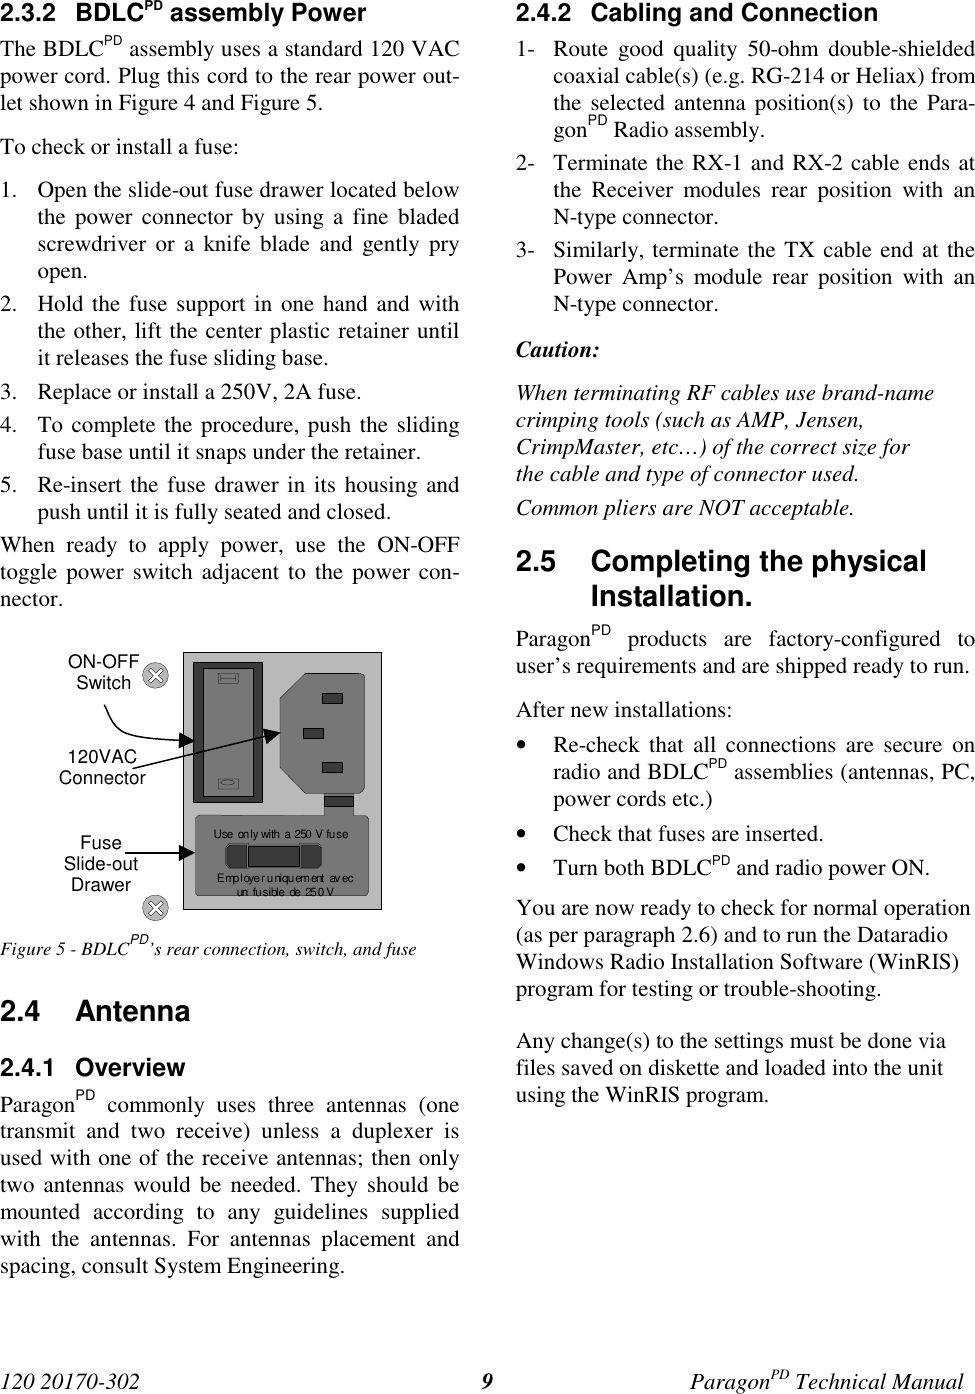 120 20170-302 ParagonPD Technical Manual92.3.2 BDLCPD assembly PowerThe BDLCPD assembly uses a standard 120 VACpower cord. Plug this cord to the rear power out-let shown in Figure 4 and Figure 5.To check or install a fuse:1. Open the slide-out fuse drawer located belowthe power connector by using a fine bladedscrewdriver or a knife blade and gently pryopen.2. Hold the fuse support in one hand and withthe other, lift the center plastic retainer untilit releases the fuse sliding base.3. Replace or install a 250V, 2A fuse.4. To complete the procedure, push the slidingfuse base until it snaps under the retainer.5. Re-insert the fuse drawer in its housing andpush until it is fully seated and closed.When ready to apply power, use the ON-OFFtoggle power switch adjacent to the power con-nector.Figure 5 - BDLCPD’s rear connection, switch, and fuse2.4 Antenna2.4.1 OverviewParagonPD commonly uses three antennas (onetransmit and two receive) unless a duplexer isused with one of the receive antennas; then onlytwo antennas would be needed. They should bemounted according to any guidelines suppliedwith the antennas. For antennas placement andspacing, consult System Engineering.2.4.2  Cabling and Connection1- Route good quality 50-ohm double-shieldedcoaxial cable(s) (e.g. RG-214 or Heliax) fromthe selected antenna position(s) to the Para-gonPD Radio assembly.2- Terminate the RX-1 and RX-2 cable ends atthe Receiver modules rear position with anN-type connector.3- Similarly, terminate the TX cable end at thePower Amp’s module rear position with anN-type connector.Caution:When terminating RF cables use brand-namecrimping tools (such as AMP, Jensen,CrimpMaster, etc…) of the correct size forthe cable and type of connector used.Common pliers are NOT acceptable.2.5  Completing the physicalInstallation.ParagonPD products are factory-configured touser’s requirements and are shipped ready to run.After new installations:• Re-check that all connections are secure onradio and BDLCPD assemblies (antennas, PC,power cords etc.)• Check that fuses are inserted.• Turn both BDLCPD and radio power ON.You are now ready to check for normal operation(as per paragraph 2.6) and to run the DataradioWindows Radio Installation Software (WinRIS)program for testing or trouble-shooting.Any change(s) to the settings must be done viafiles saved on diskette and loaded into the unitusing the WinRIS program.E mp l oye r u ni qu em ent  av ecun  fu sible  de  25 0 VUse only with  a  250  V fu seON-OFFSwitch120VACConnectorFuseSlide-outDrawer